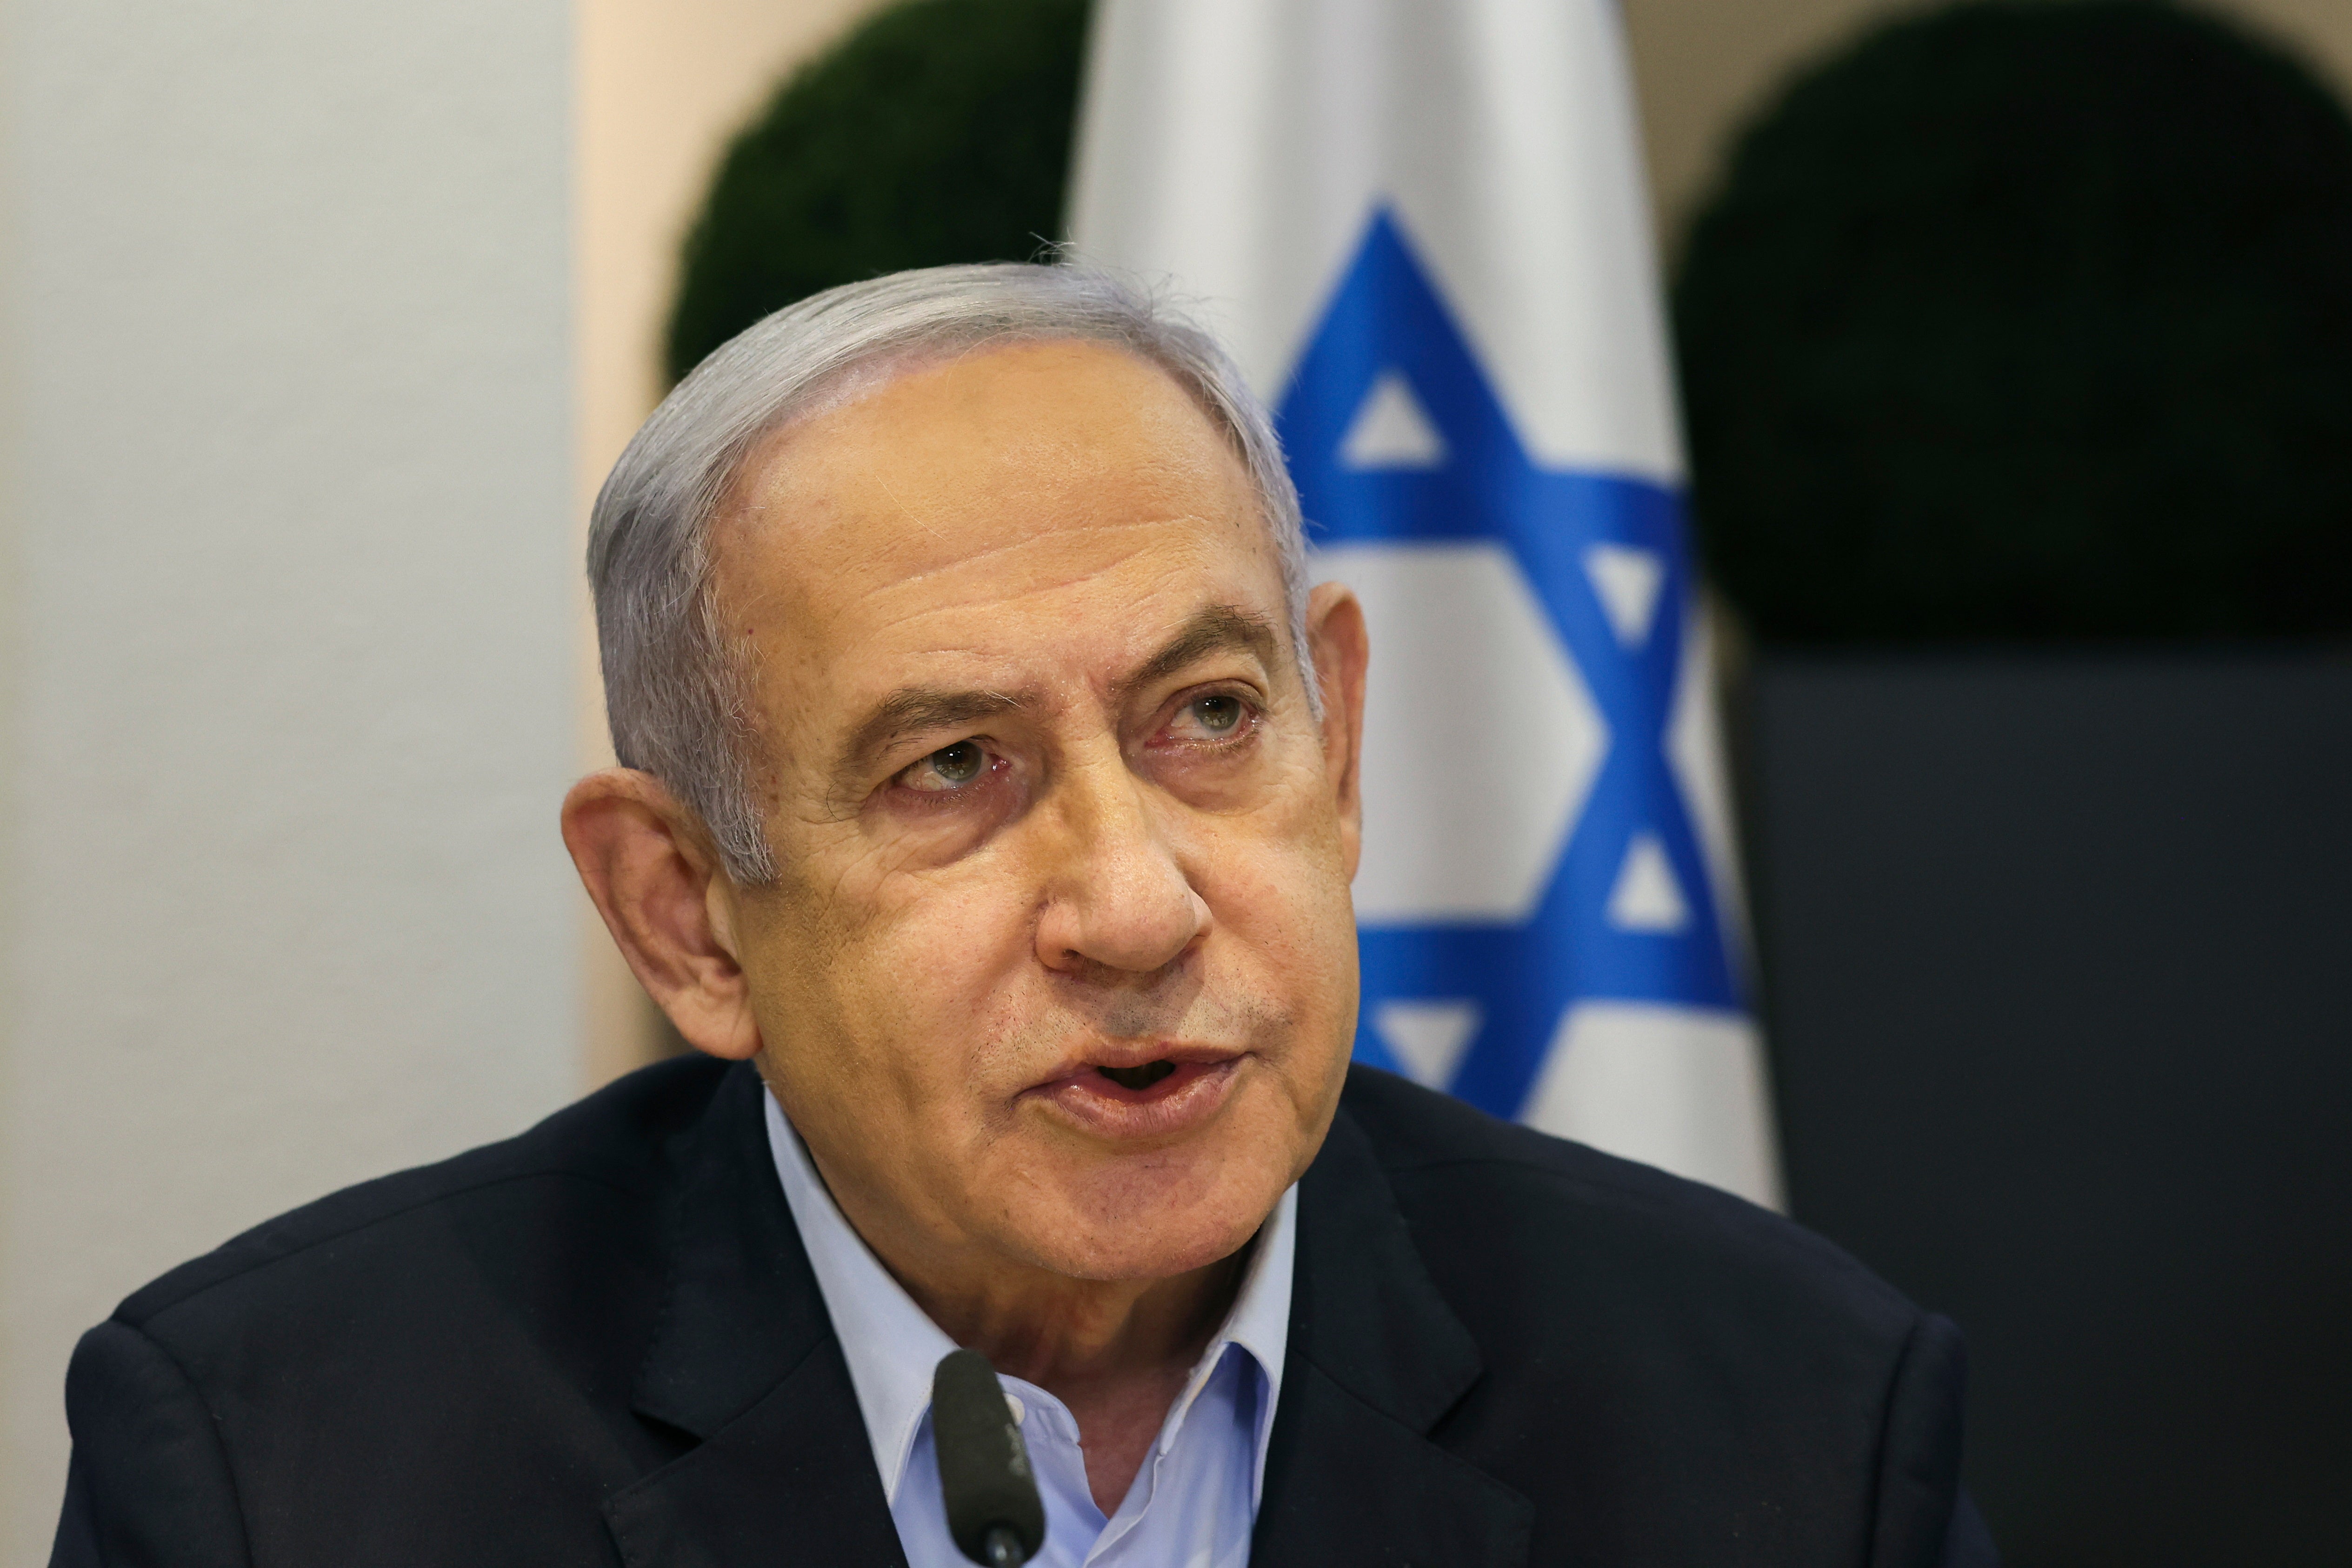 Israeli prime minister Benjamin Netanyahu, who announced the ejection of Al Jazeera from the country